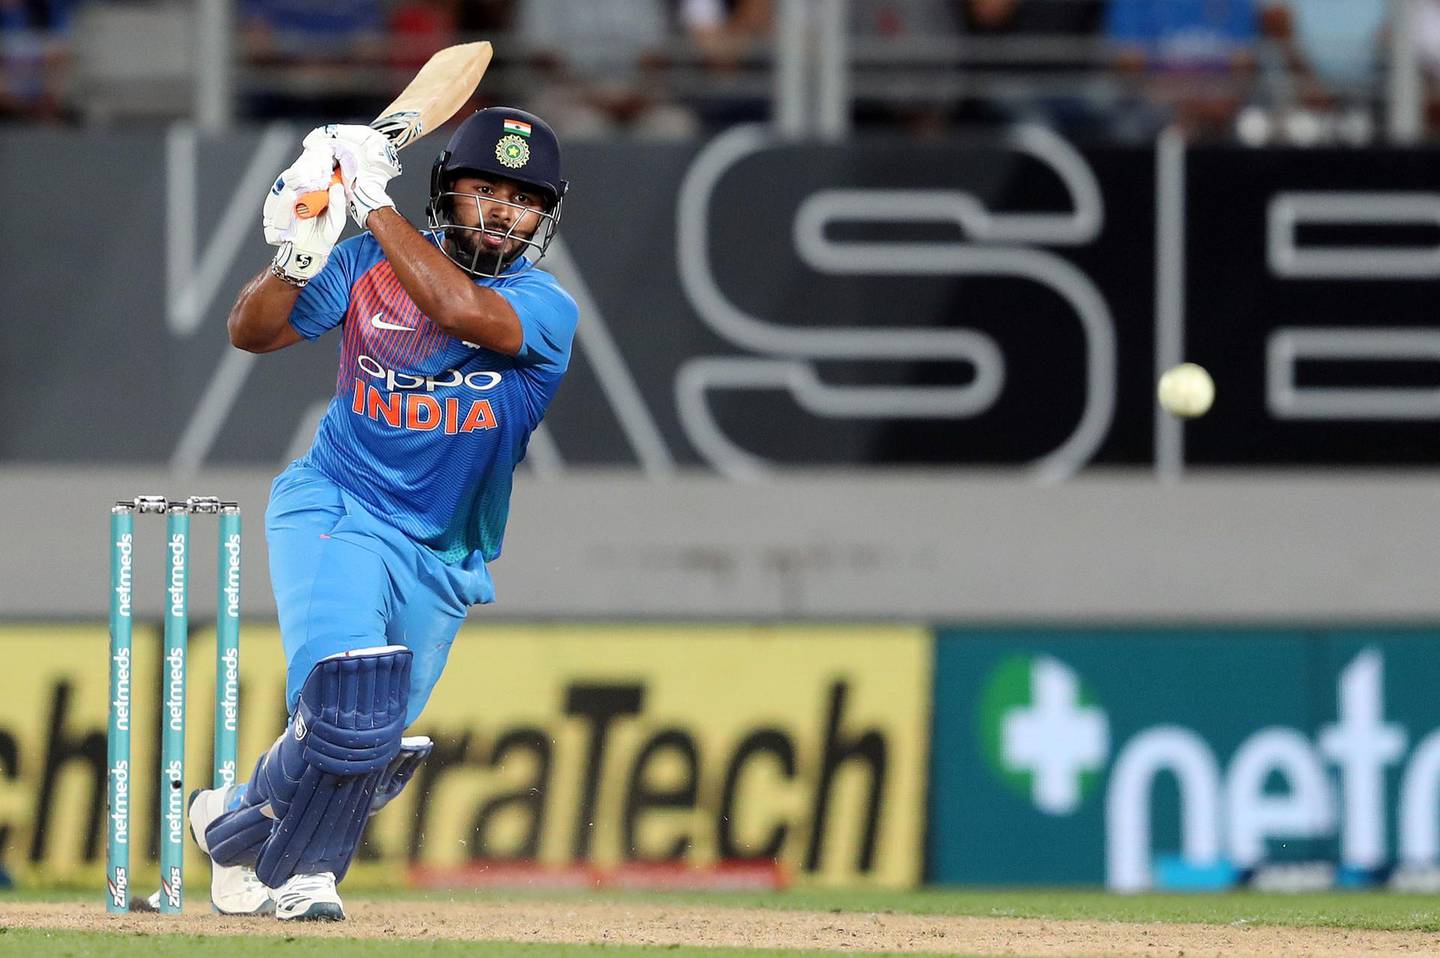 India's Rishabh Pant plays a shot during the second Twenty20 international cricket match between New Zealand and India in Auckland on February 8, 2019. / AFP / MICHAEL BRADLEY
